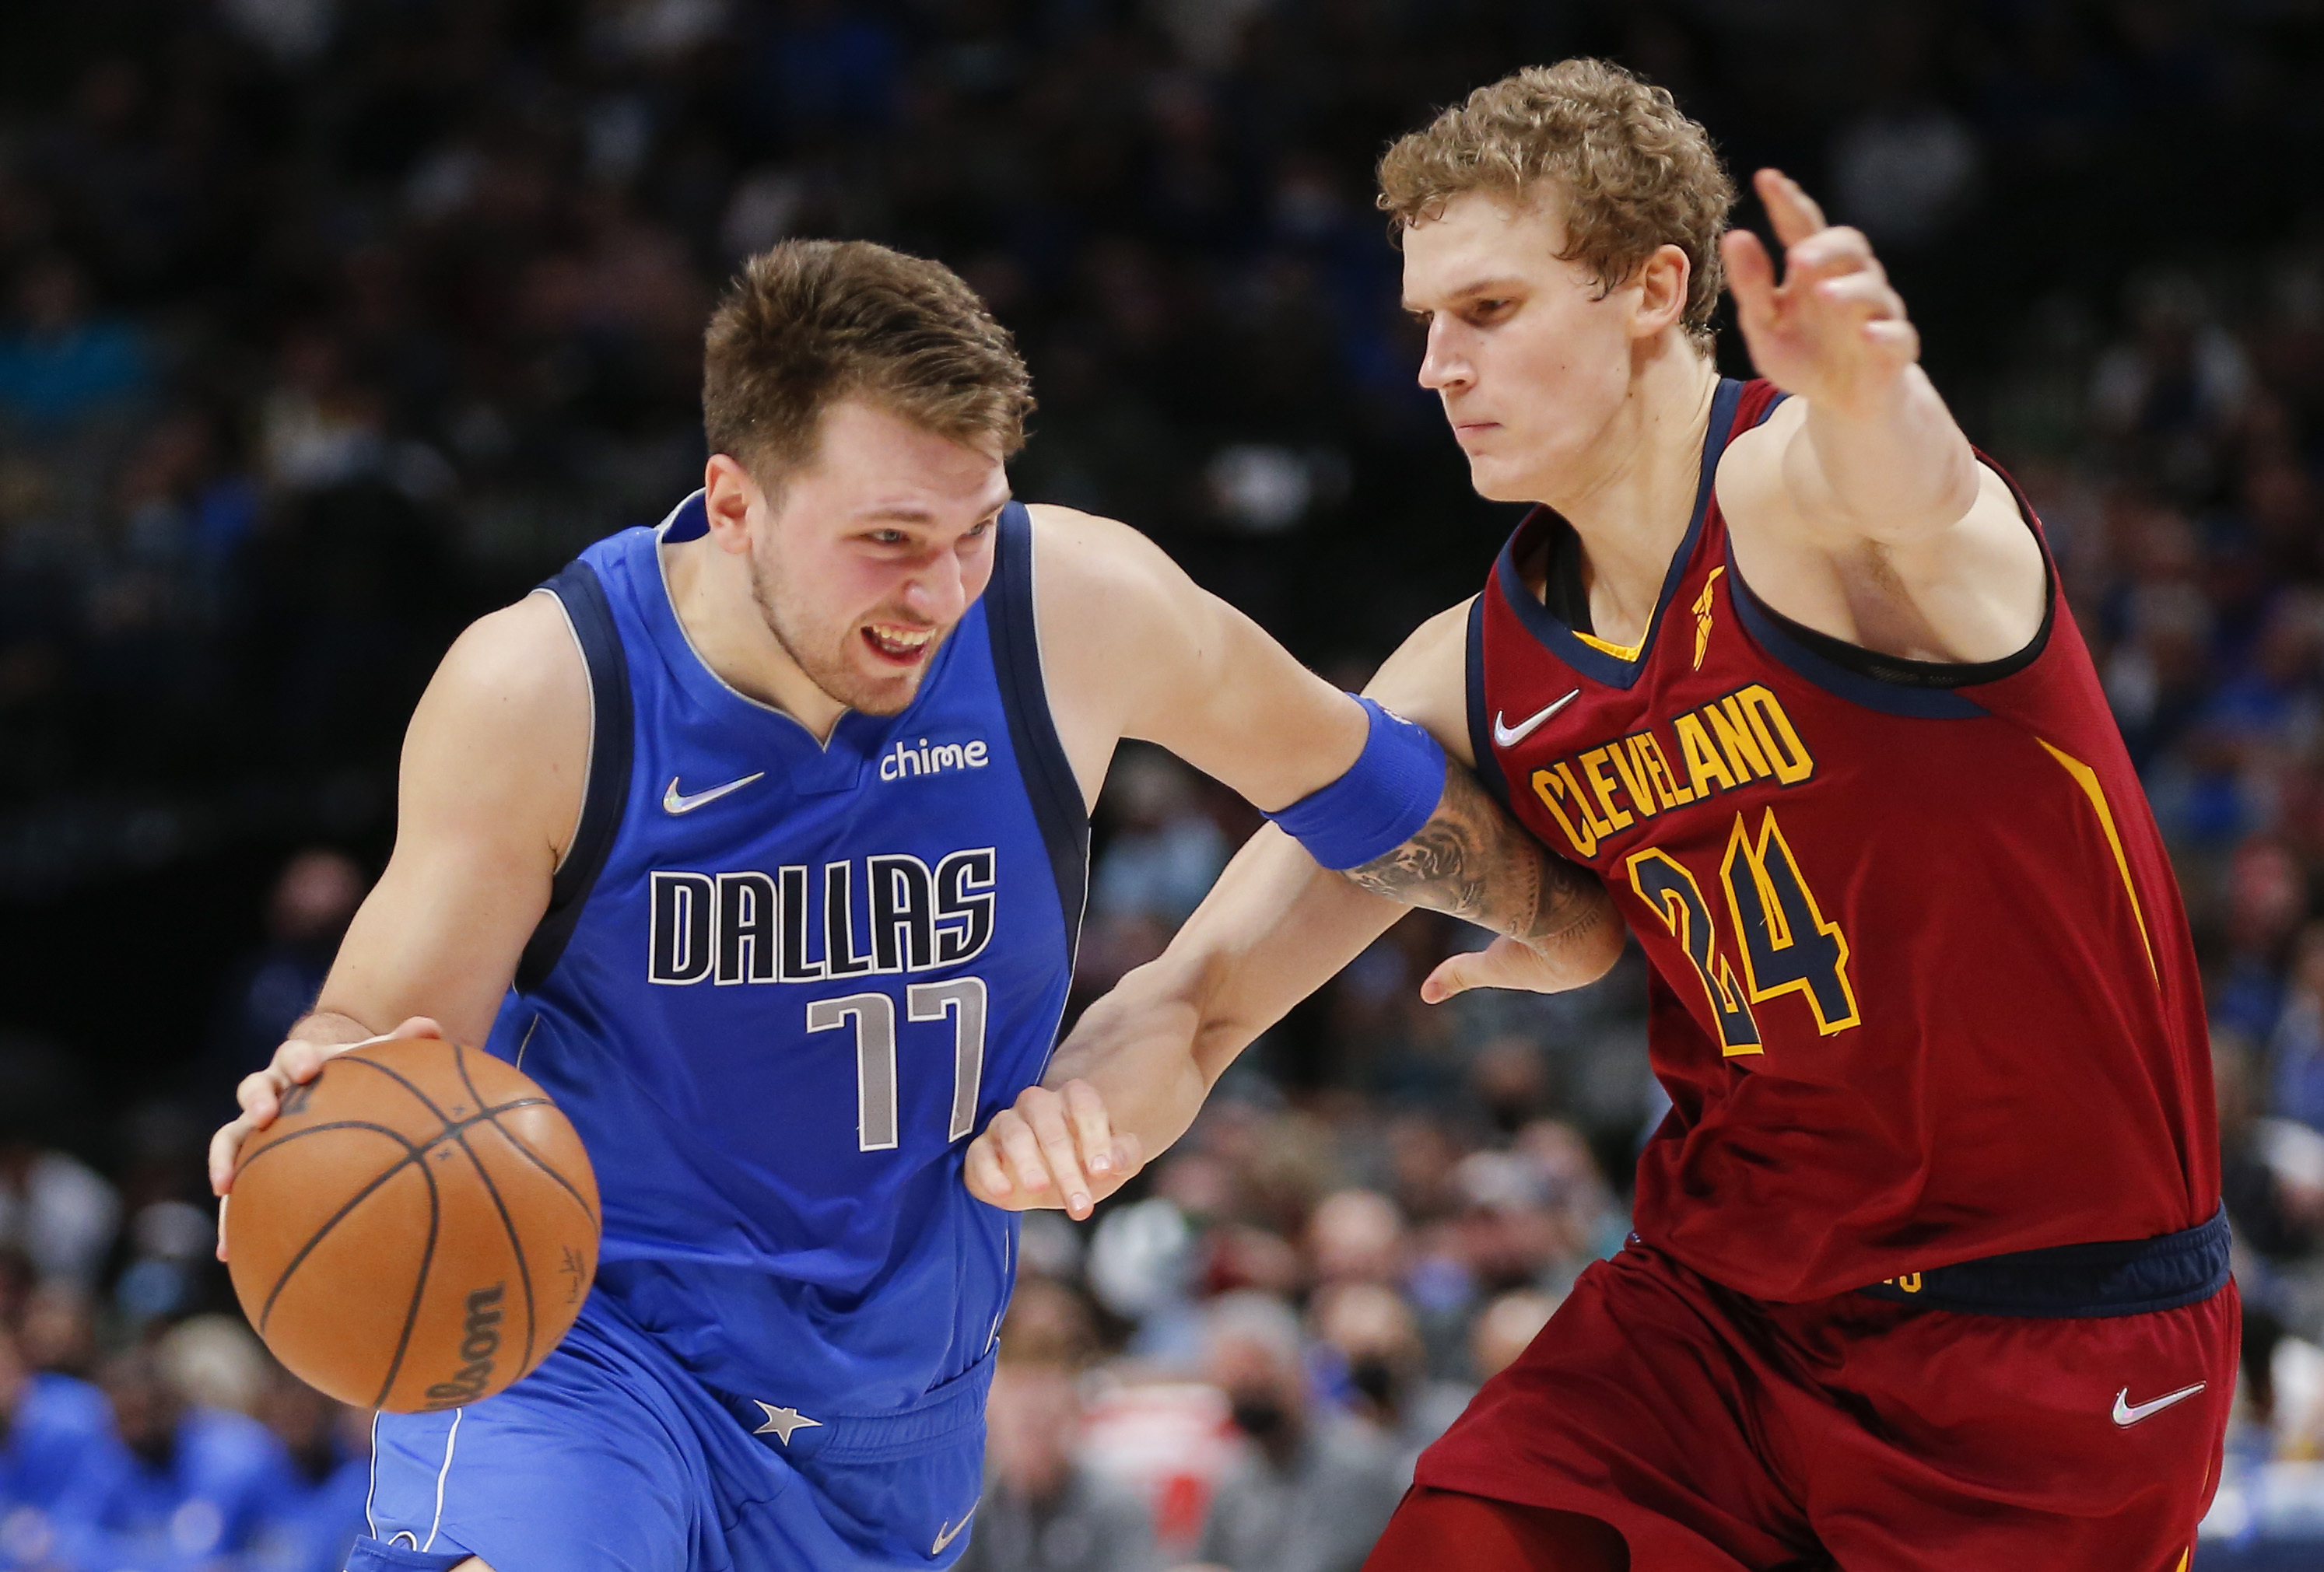 It's just a different game” - Lauri Markkanen joins Luka Doncic in